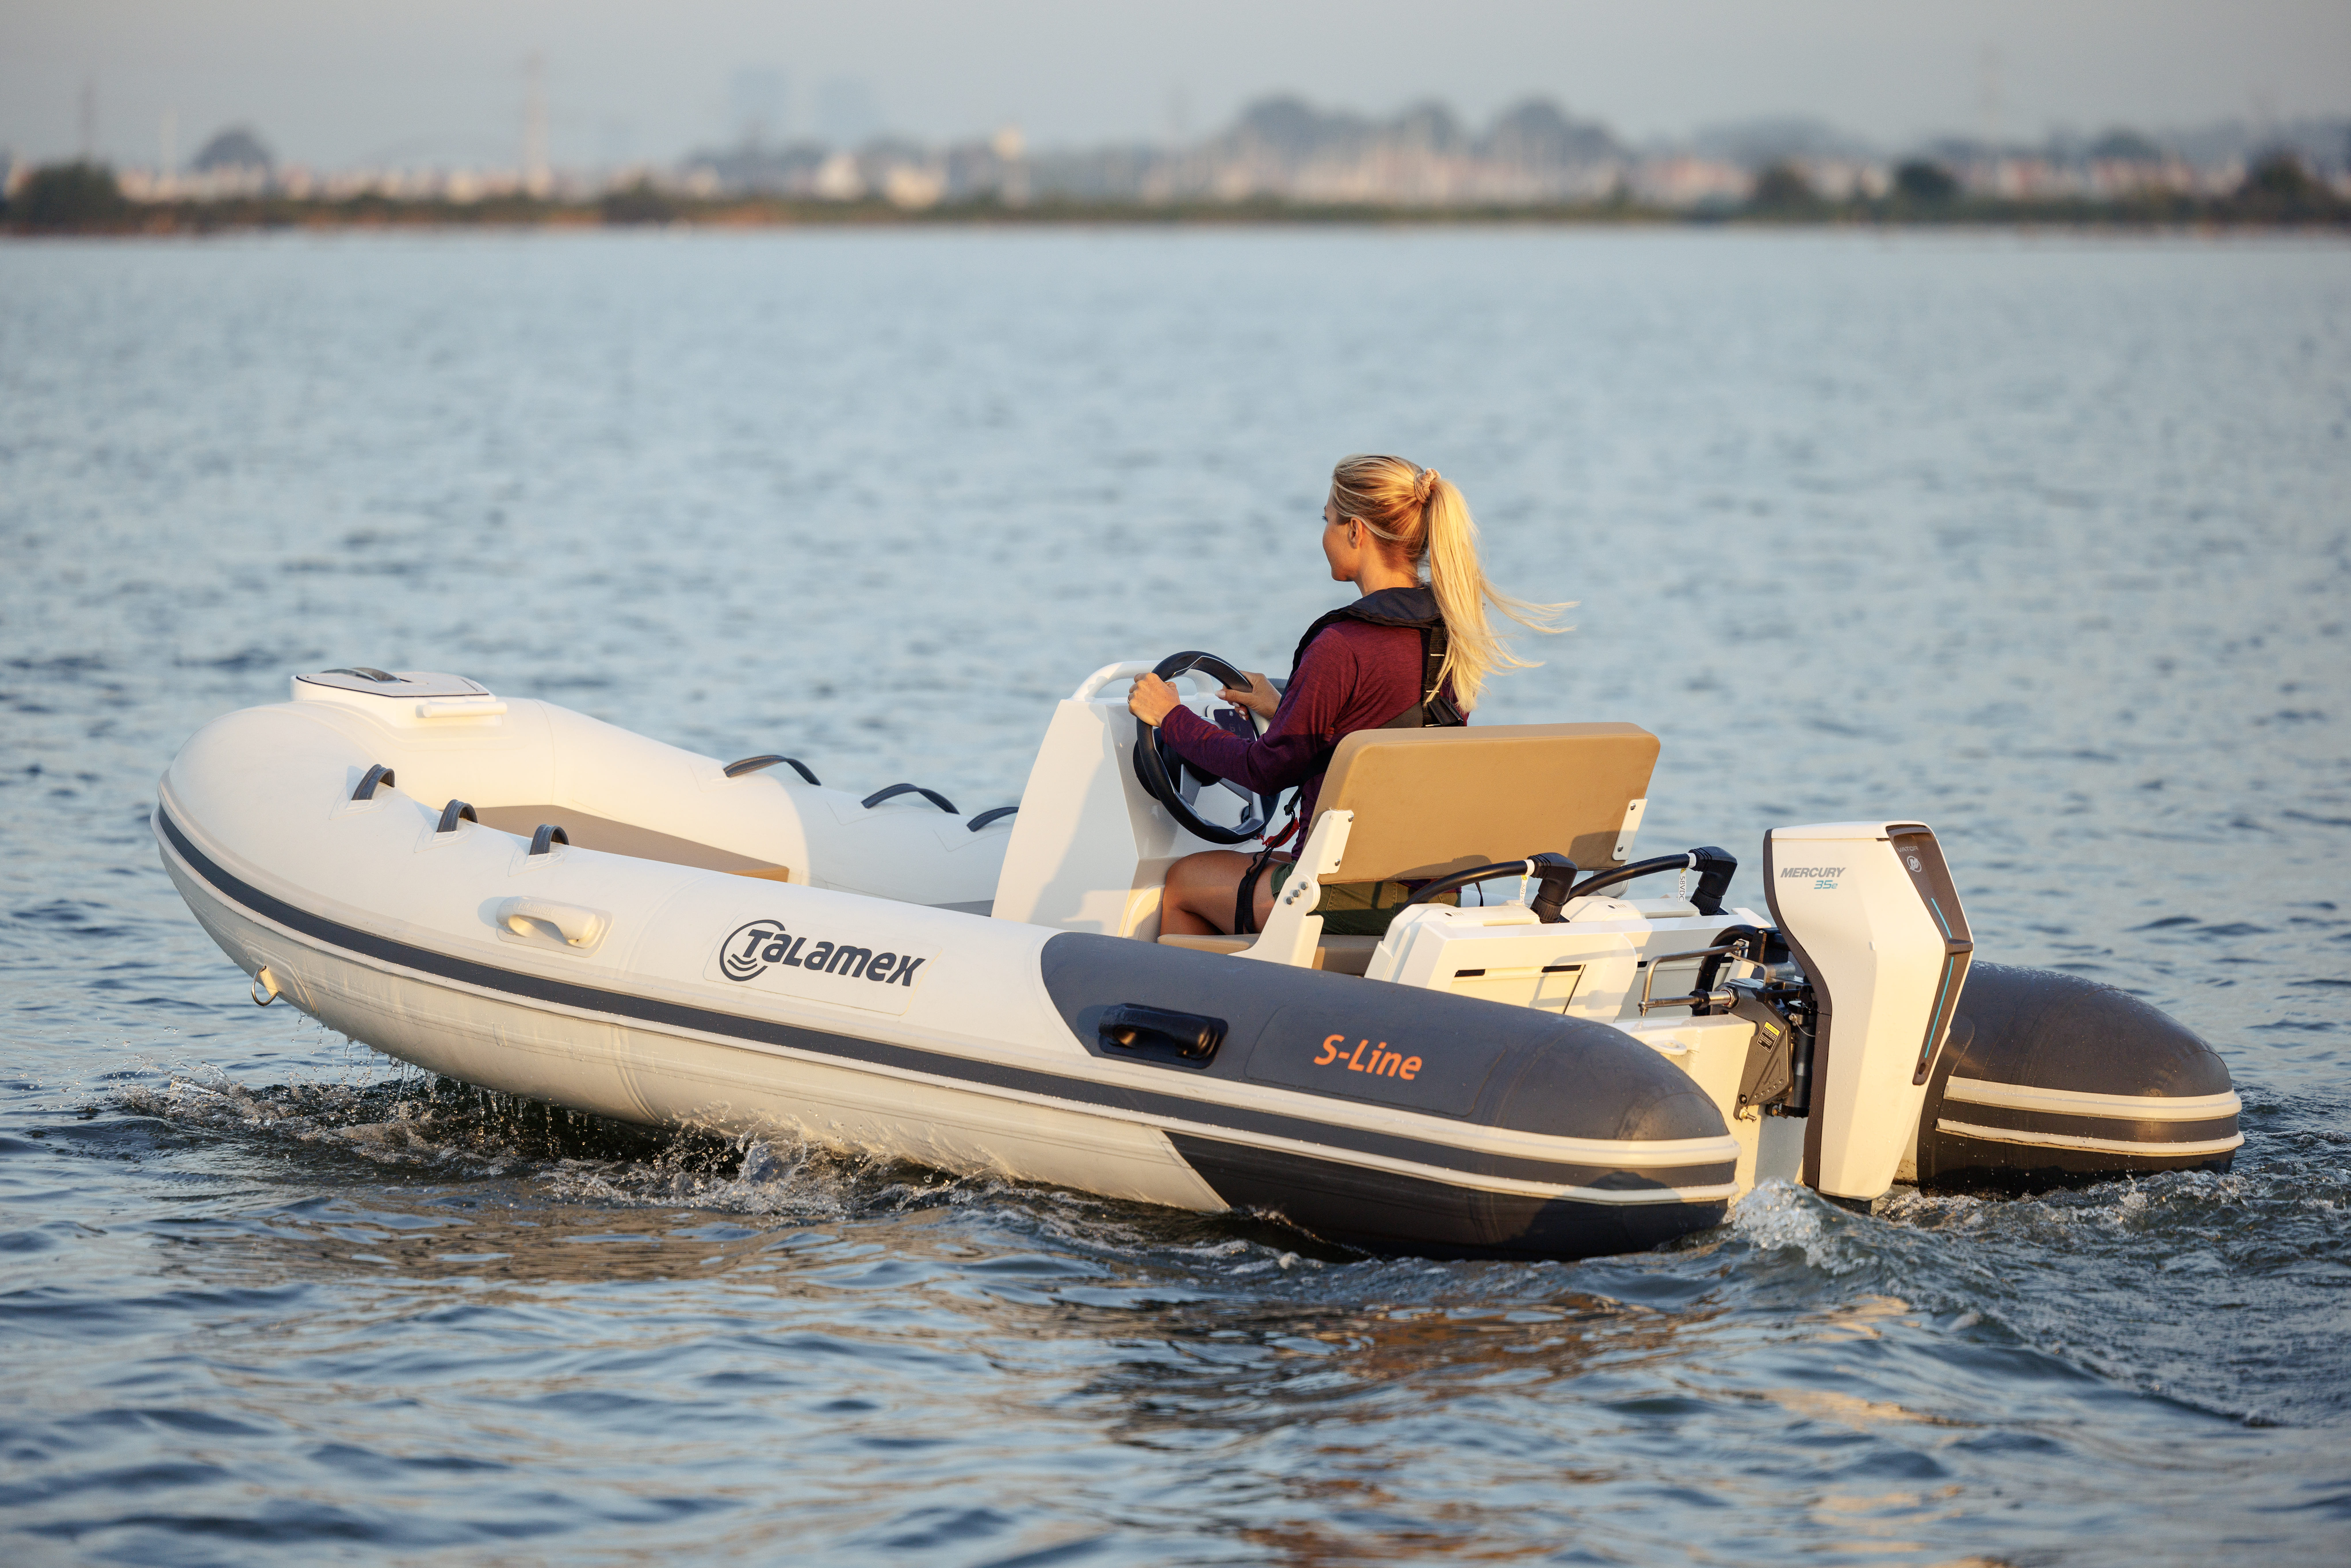 Cost of electric motor for inflatable boat